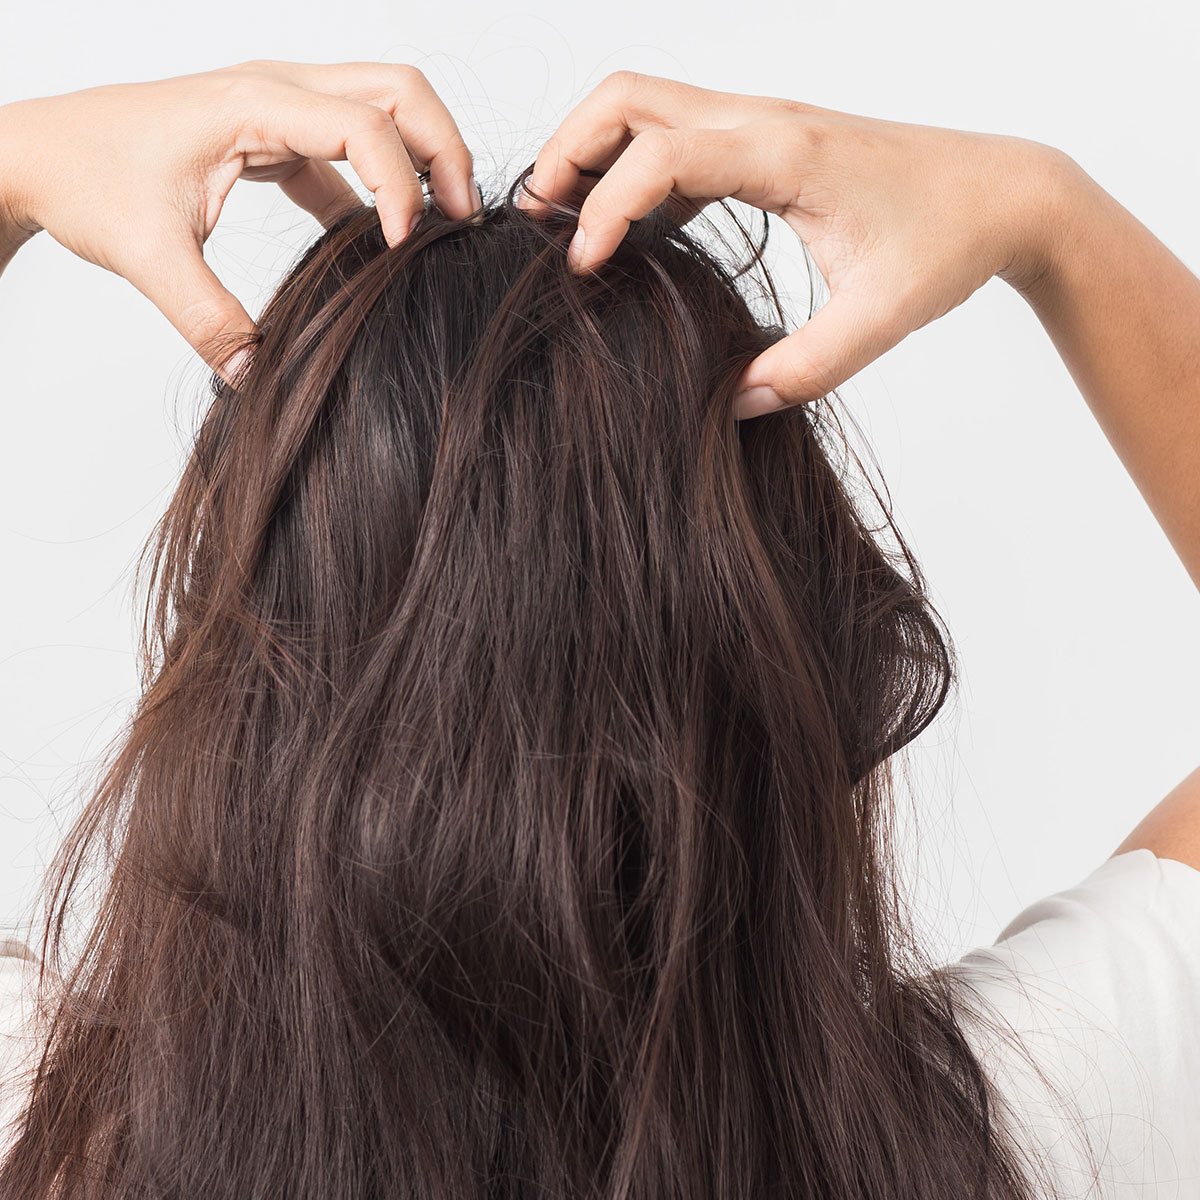 How To Massage Your Scalp: A Step-by-Step Guide (+ Benefits)